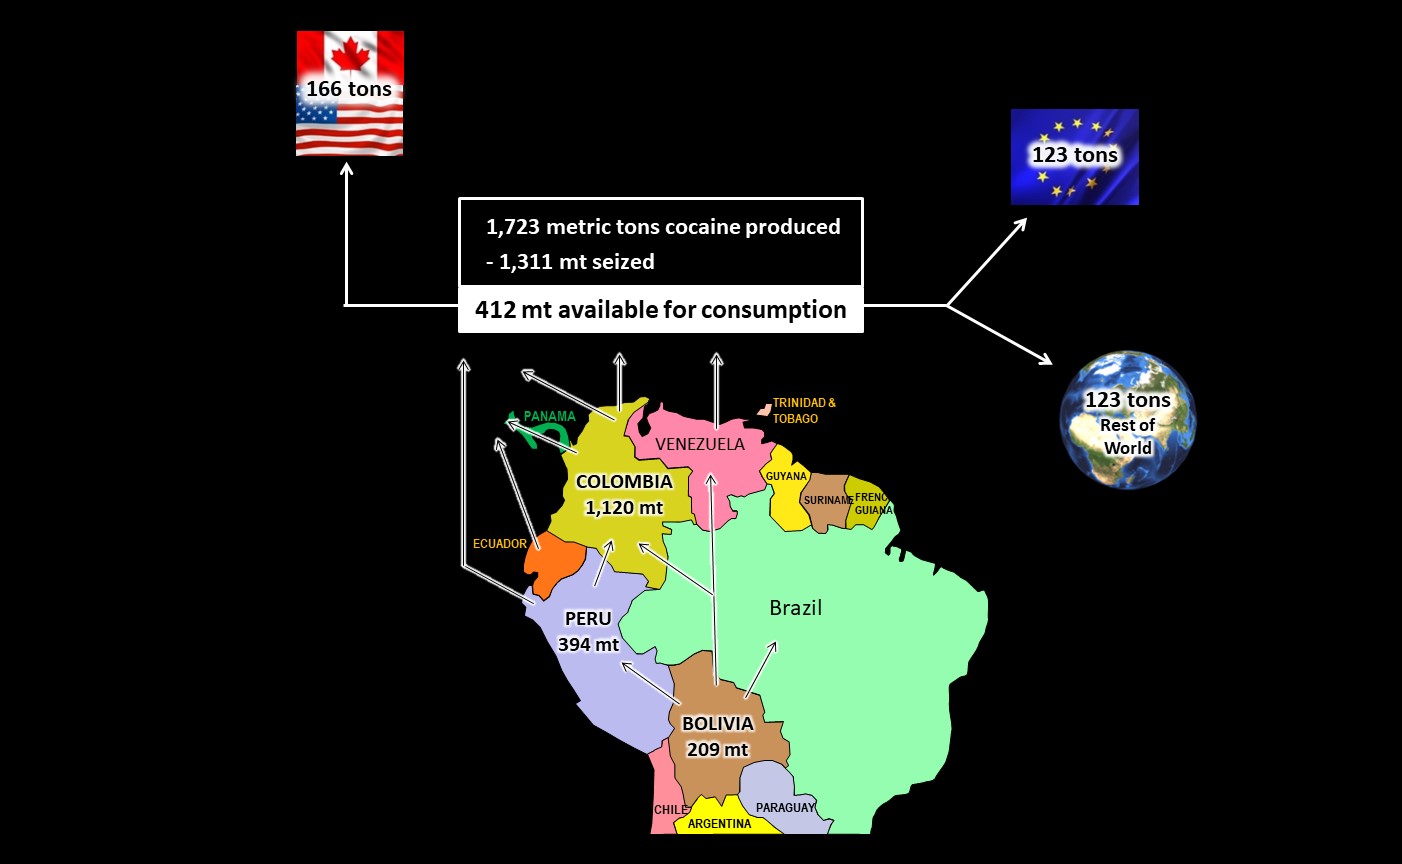 Map of South America showing cocaine production in Peru, Bolivia, and Colombia and trafficking routes to North America and Europe